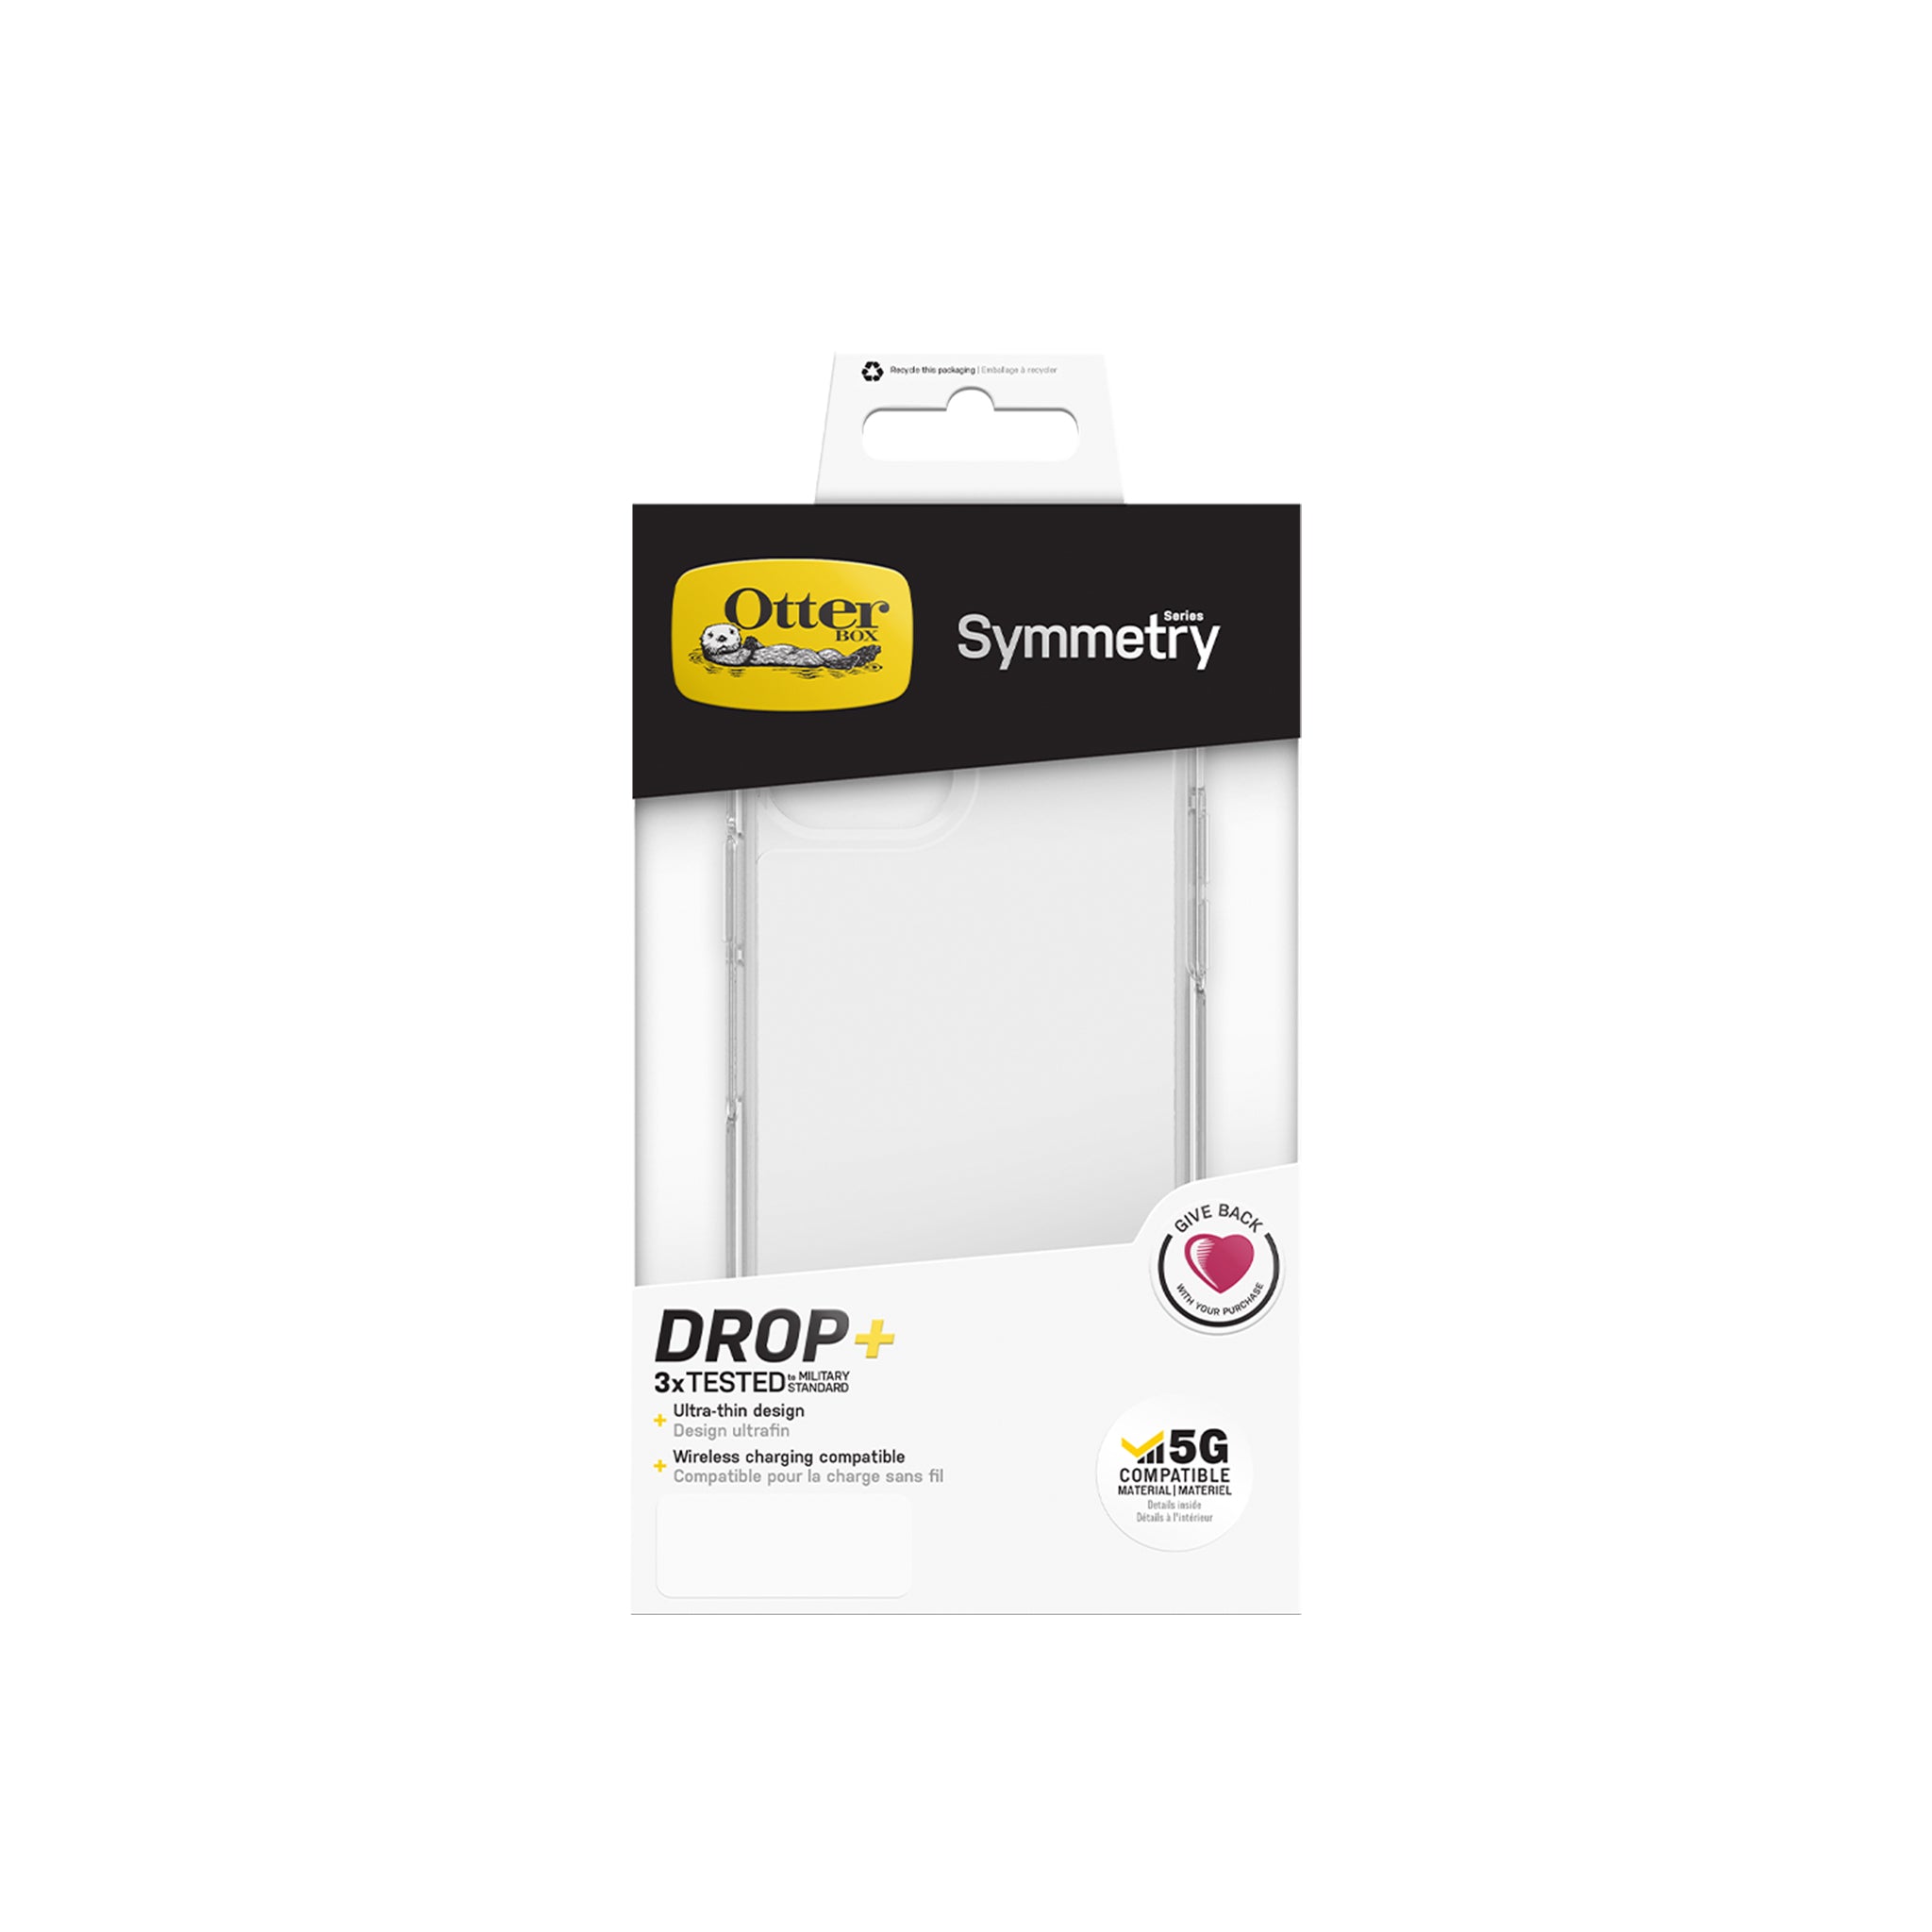 OtterBox - Symmetry Clear for Iphone 12/12 Pro - CLEAR